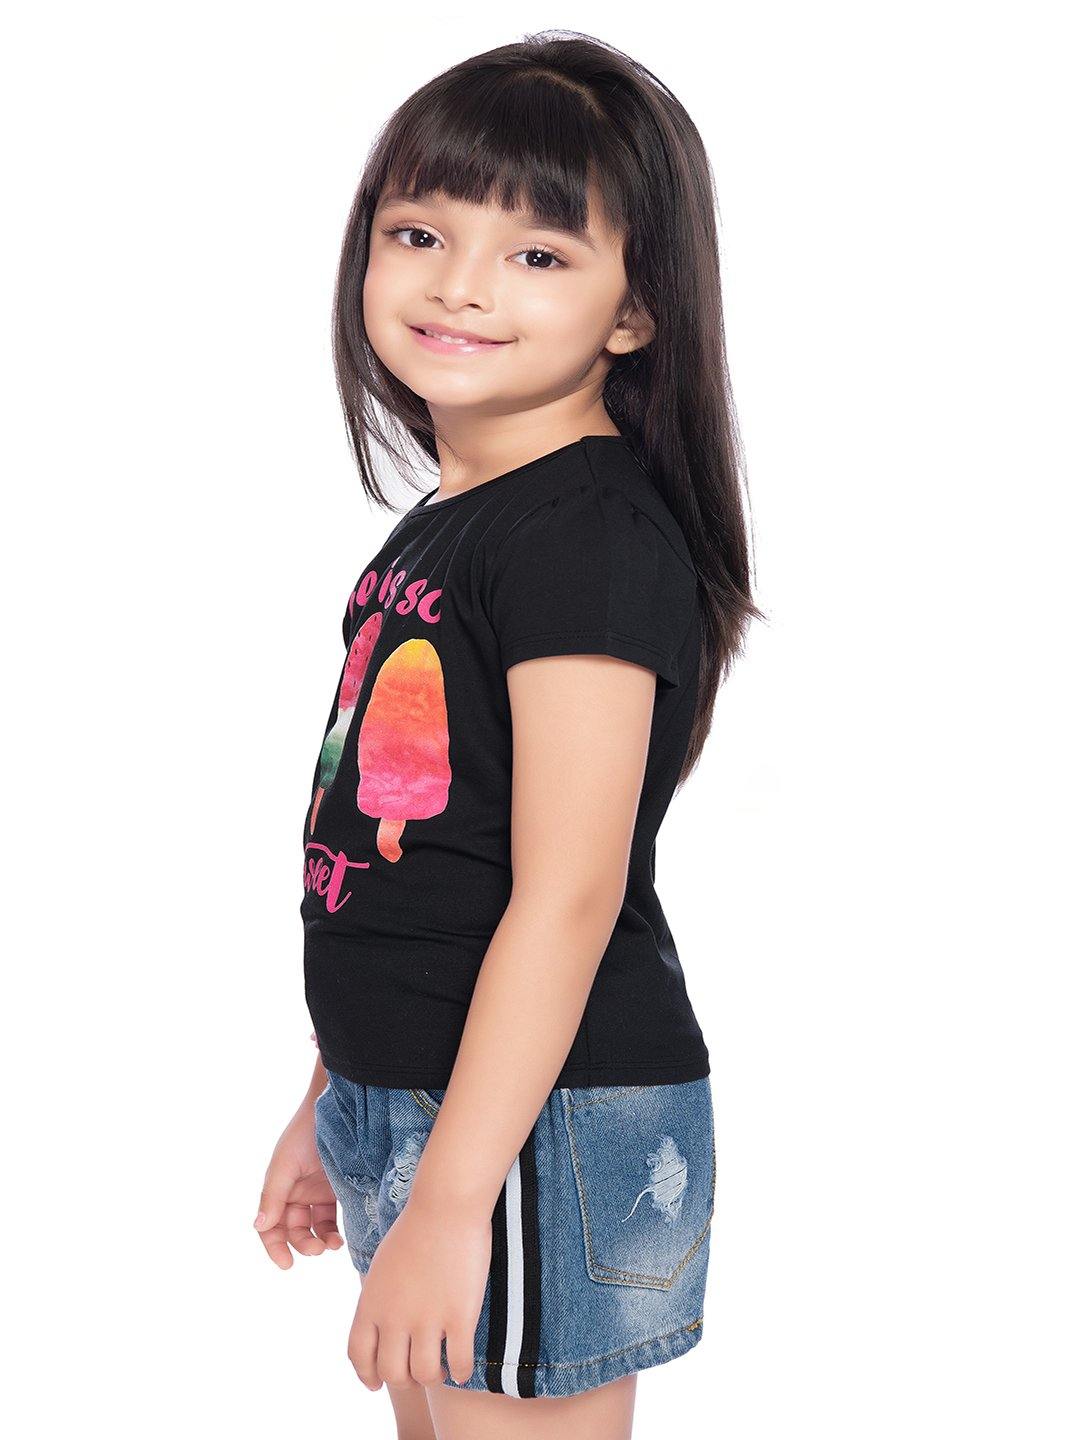 Tiny Baby Black Colored Top - T-108 Black - TINY BABY INDIA shop.tinybaby.in